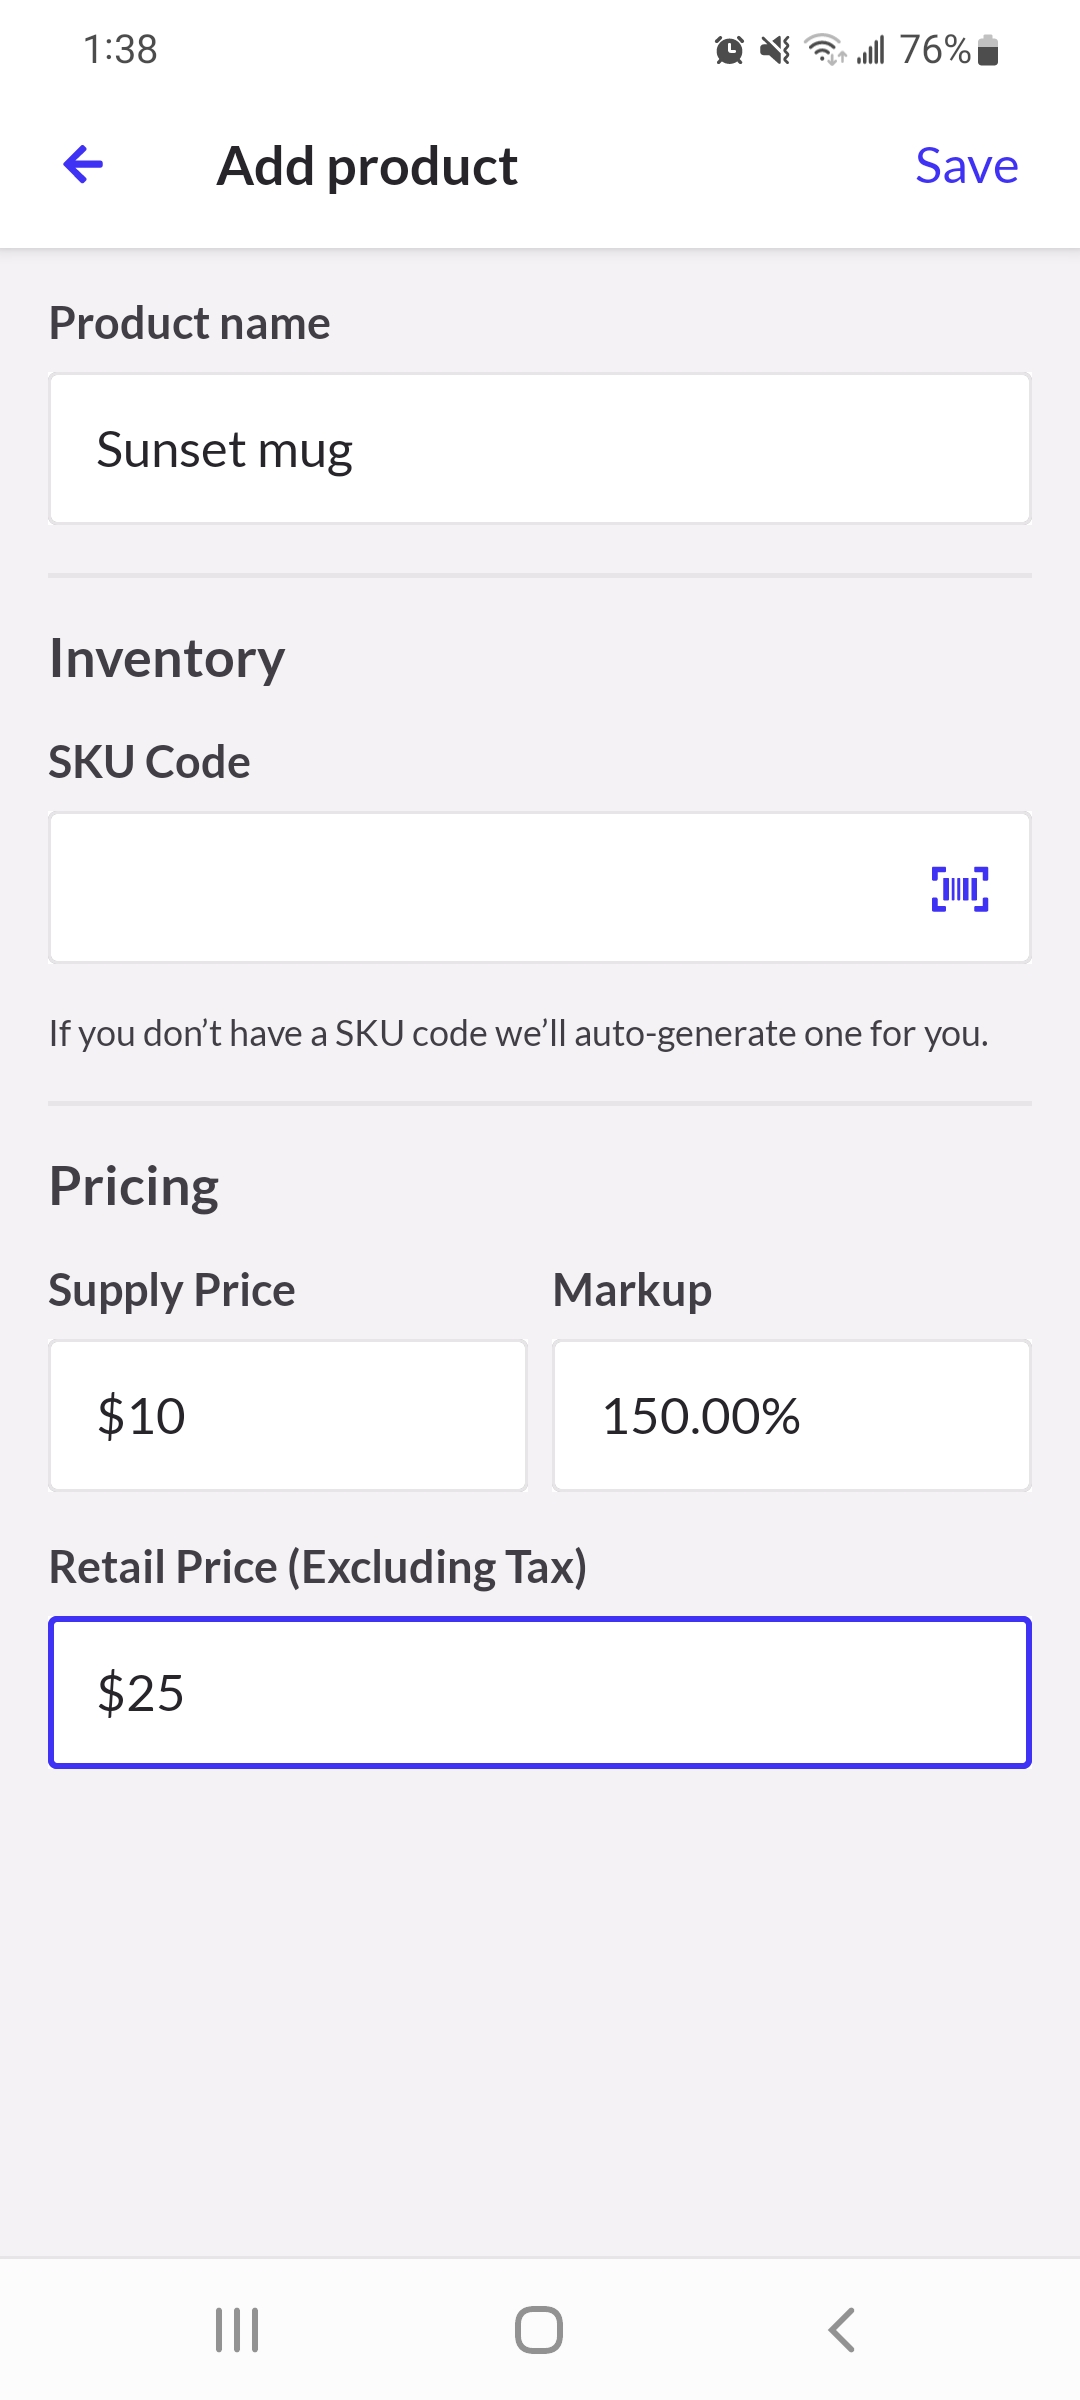 New product page with fields for name, sku, and pricing information.